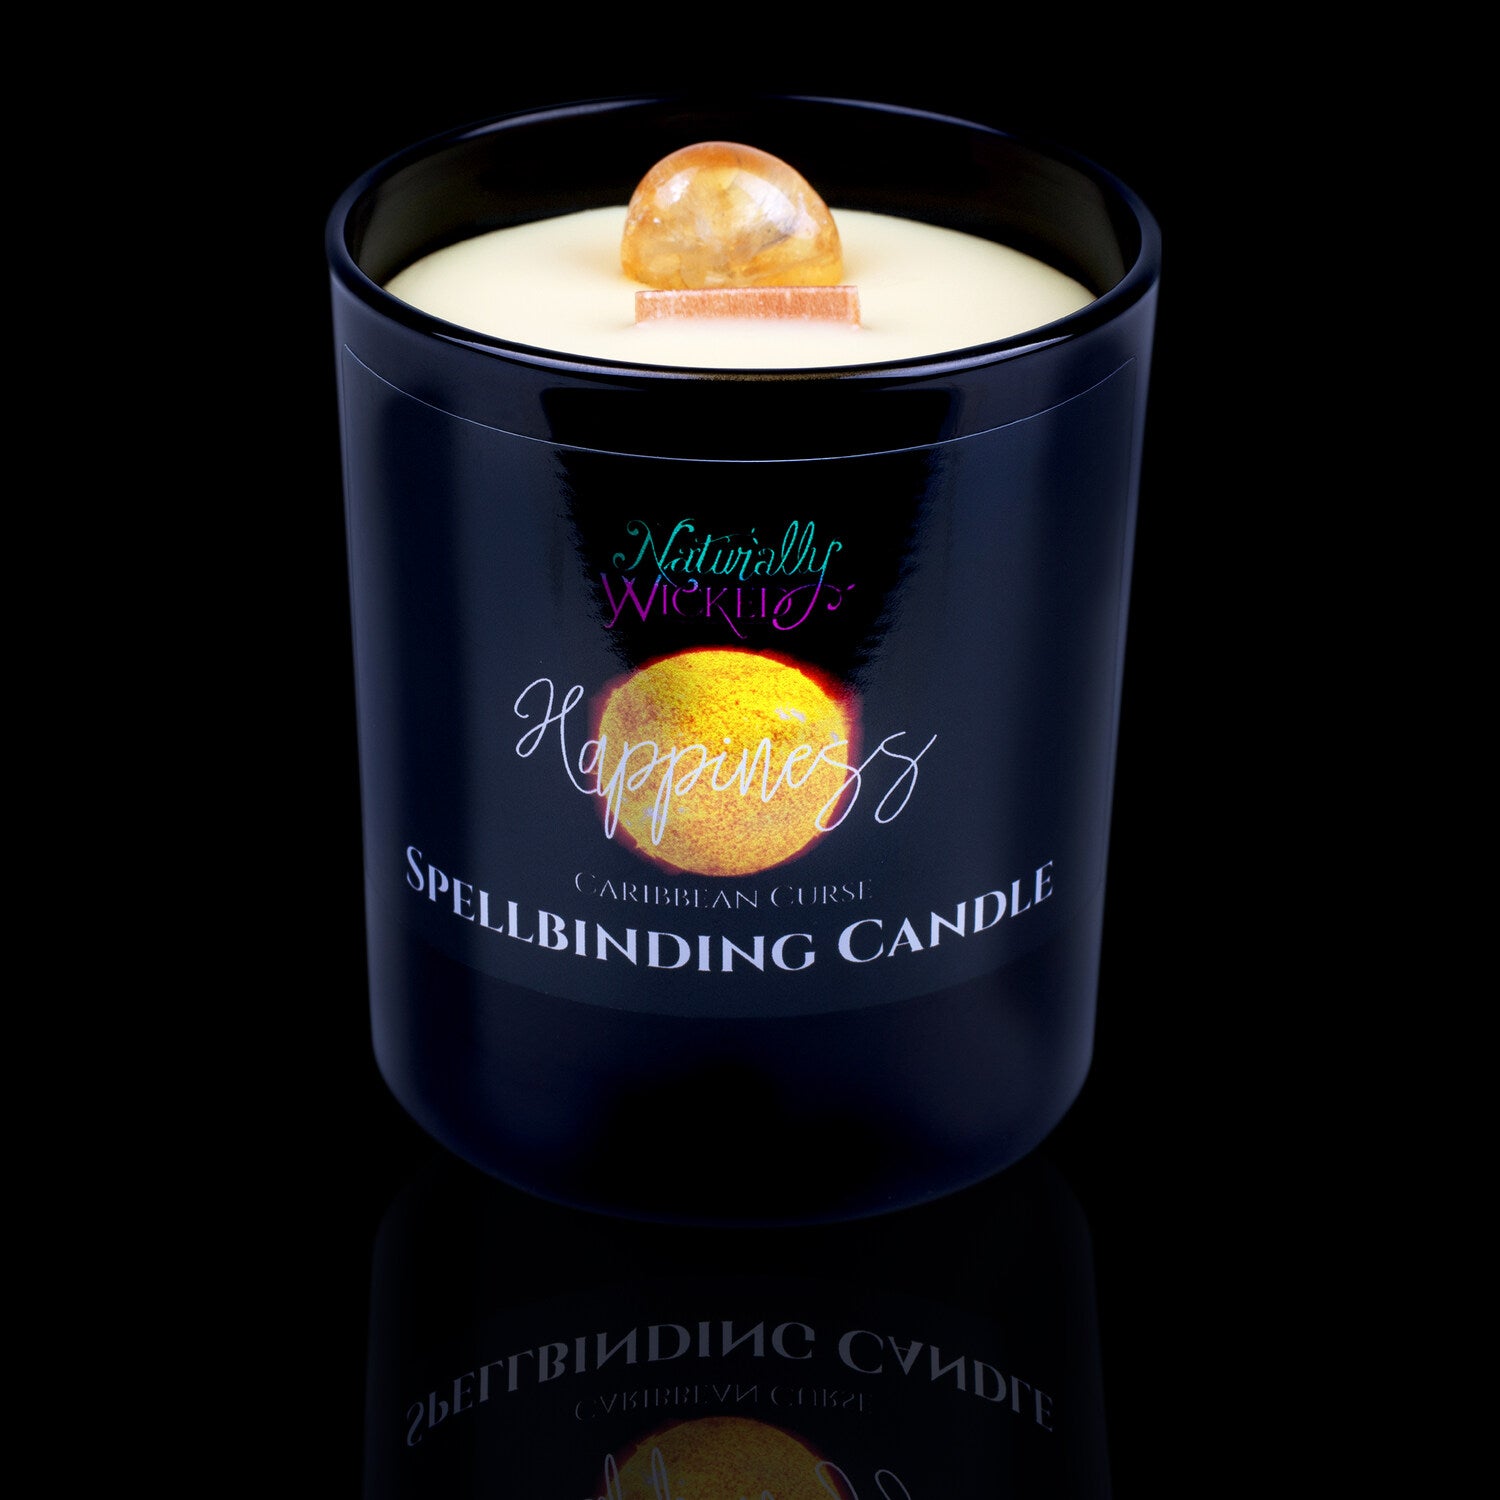 Naturally Wicked Spellbinding Happiness Crystal Candle Entombed In Yellow Plant-Based Wax With Crackling Wood Wick & Citrine Crystal. Give The Gift Of Happiness